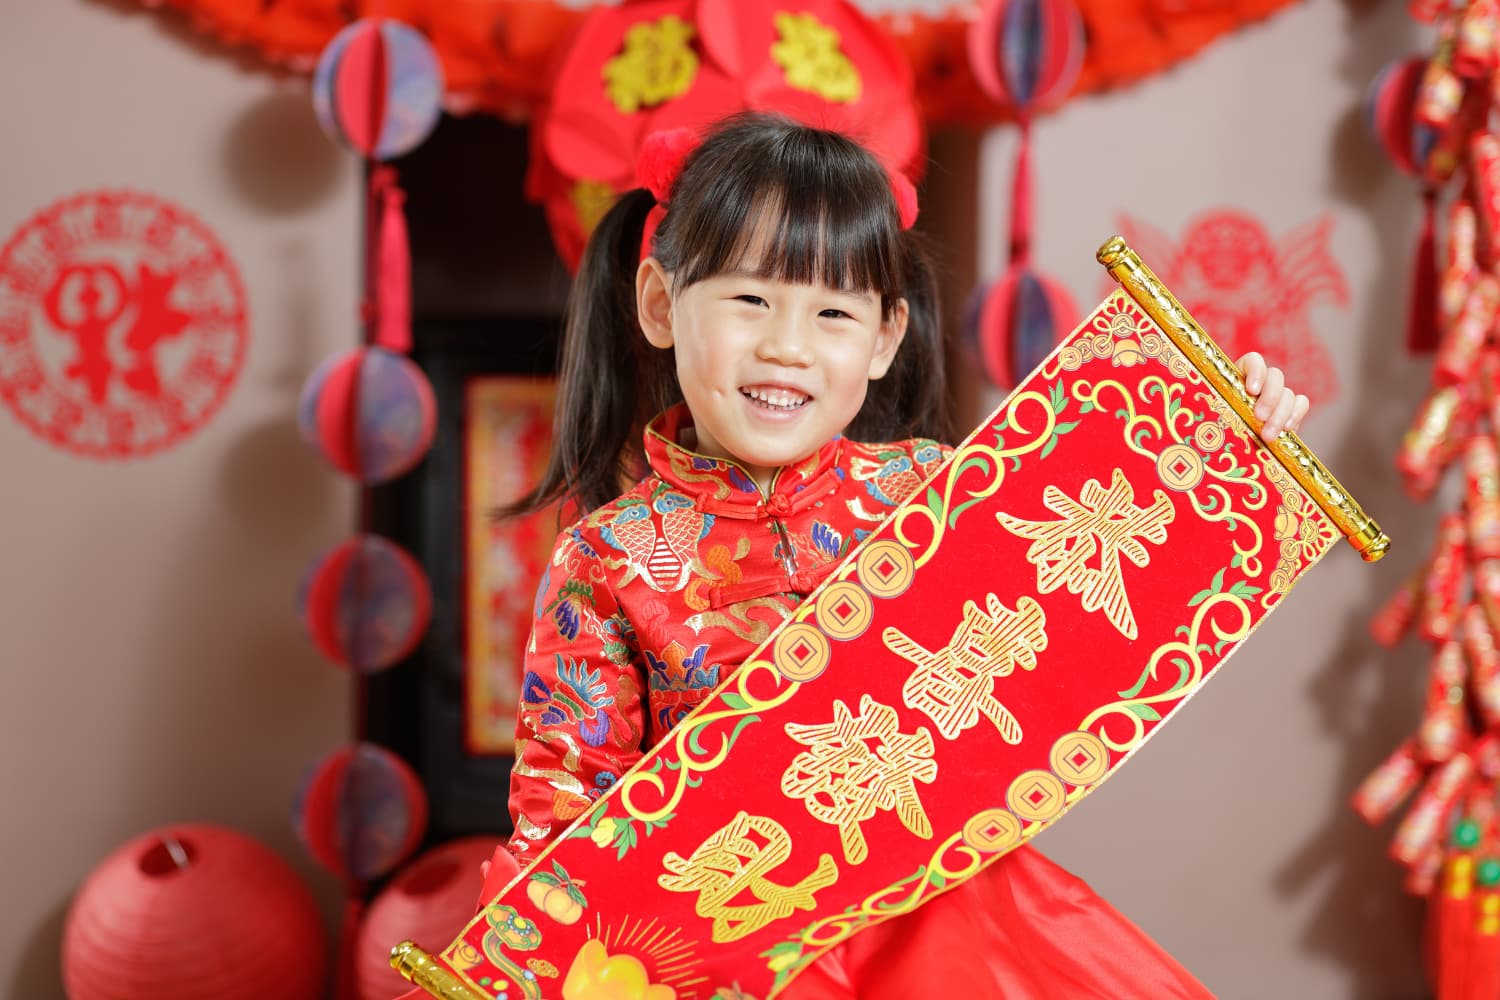 8 Most Popular Chinese New Year Greetings – All Things Delicious